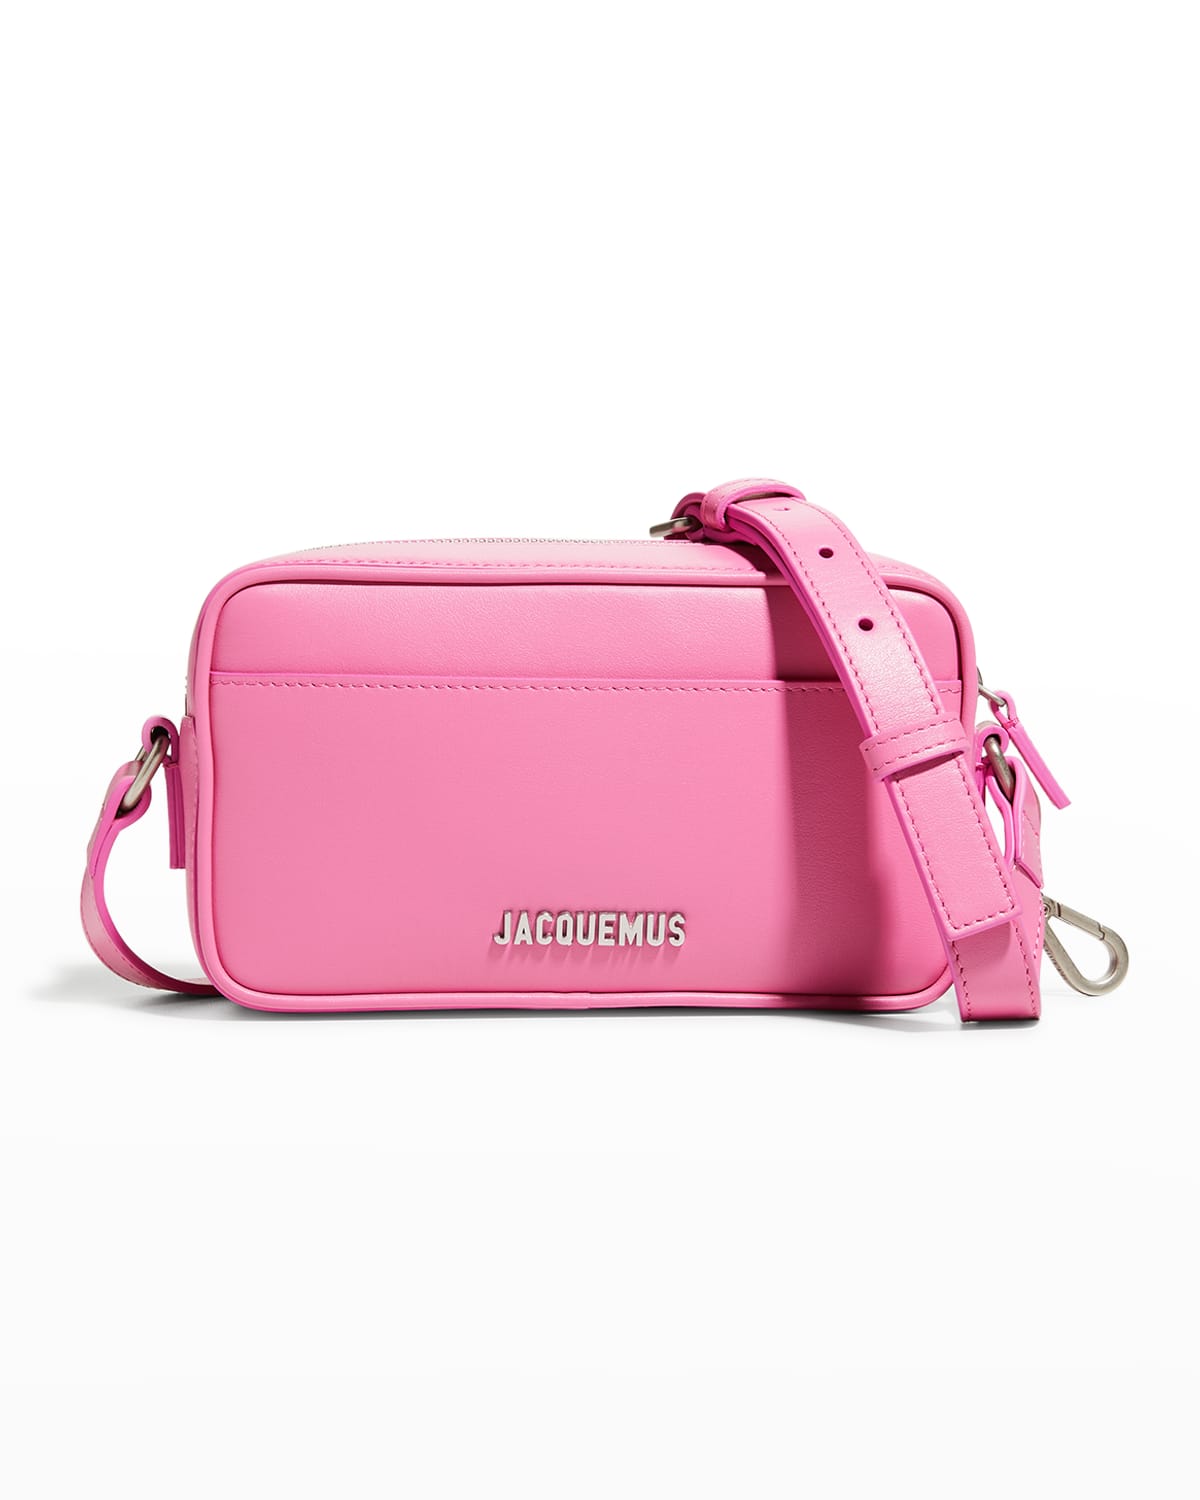 Jacquemus Le Baneto Zip Leather Crossbody Bag In Light Pink